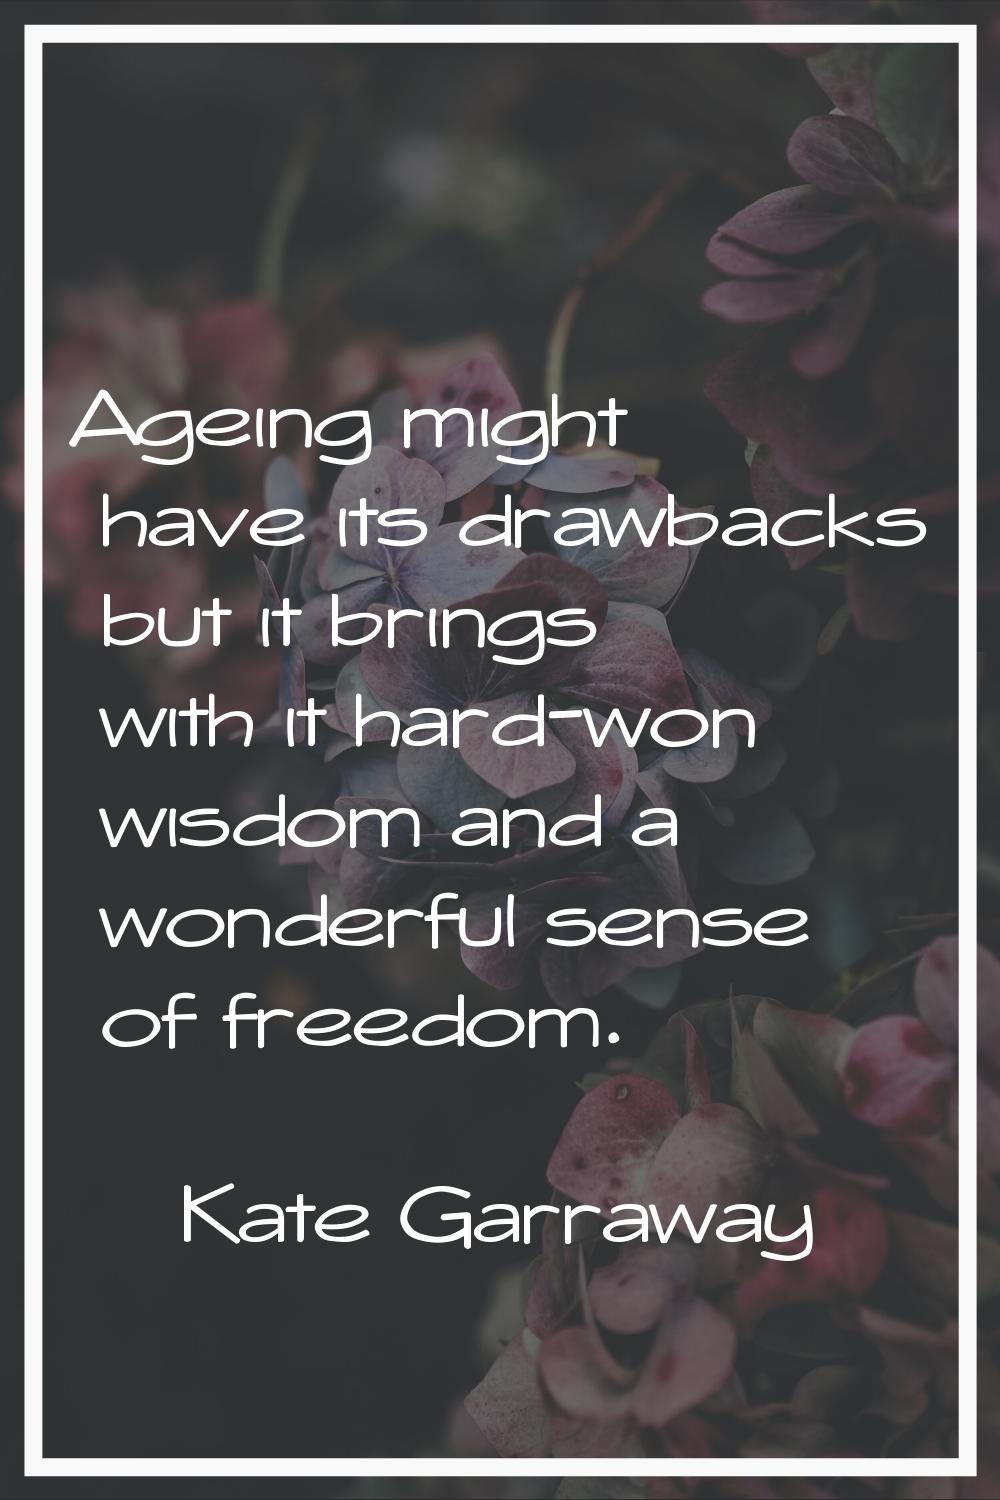 Ageing might have its drawbacks but it brings with it hard-won wisdom and a wonderful sense of free